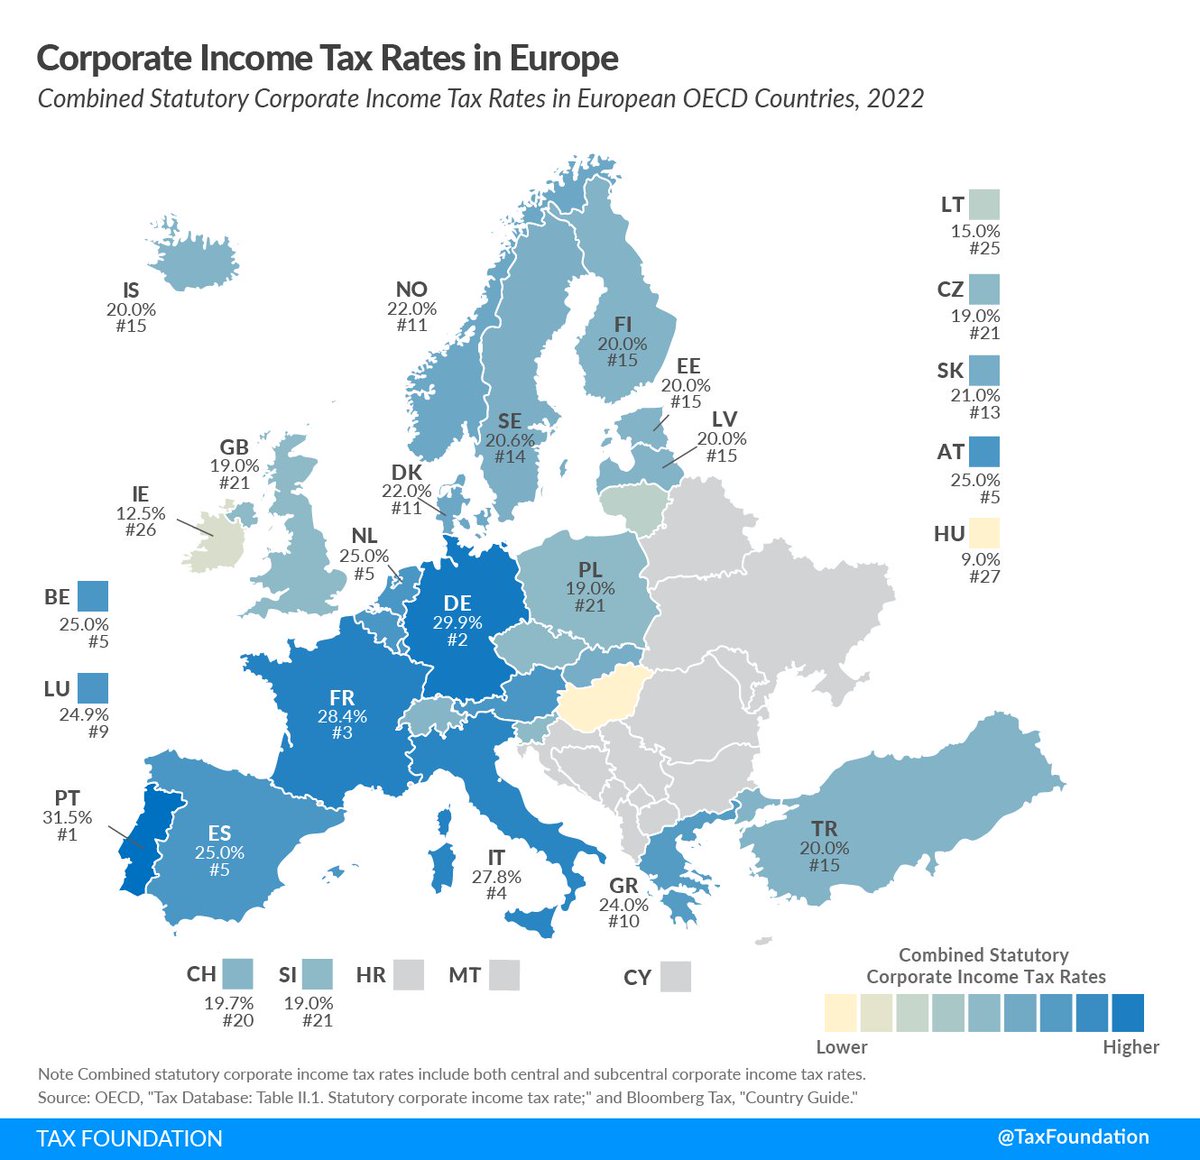 .@TaxFoundation’s figures show that introducing a #globalminimumtax would almost double the burden on businesses in HU🇭🇺 and threaten our competitive corporate tax regime. In the midst of an economic downturn, we have to support investments to protect jobs&growth rates.